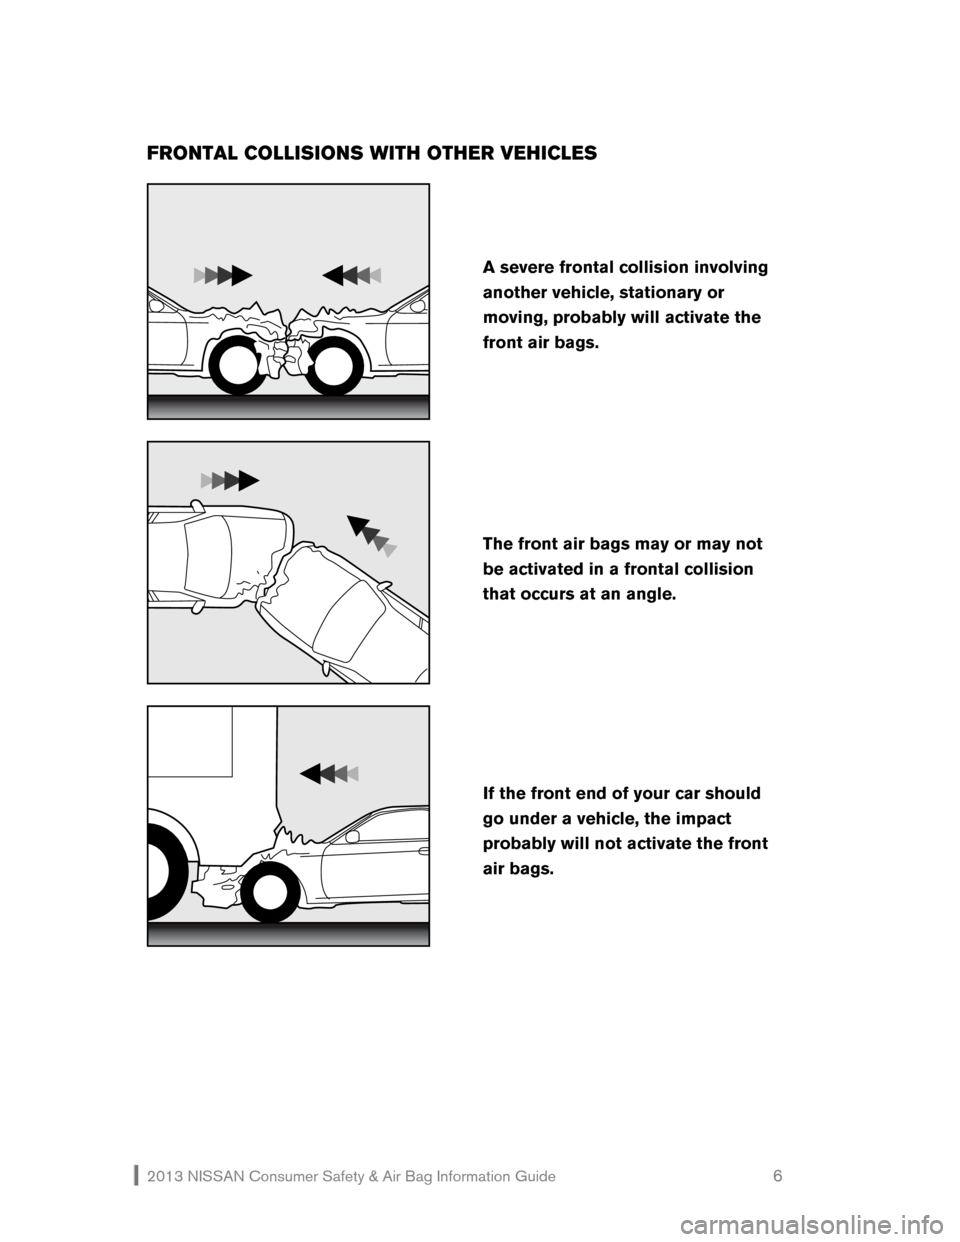 NISSAN ARMADA 2013 1.G Consumer Safety Air Bag Information Guide 2013 NISSAN Consumer Safety & Air Bag Information Guide                                                   6 
FRONTAL COLLISIONS WITH OTHER VEHICLES 
 
 
 
 
If the front end of your car should 
go und